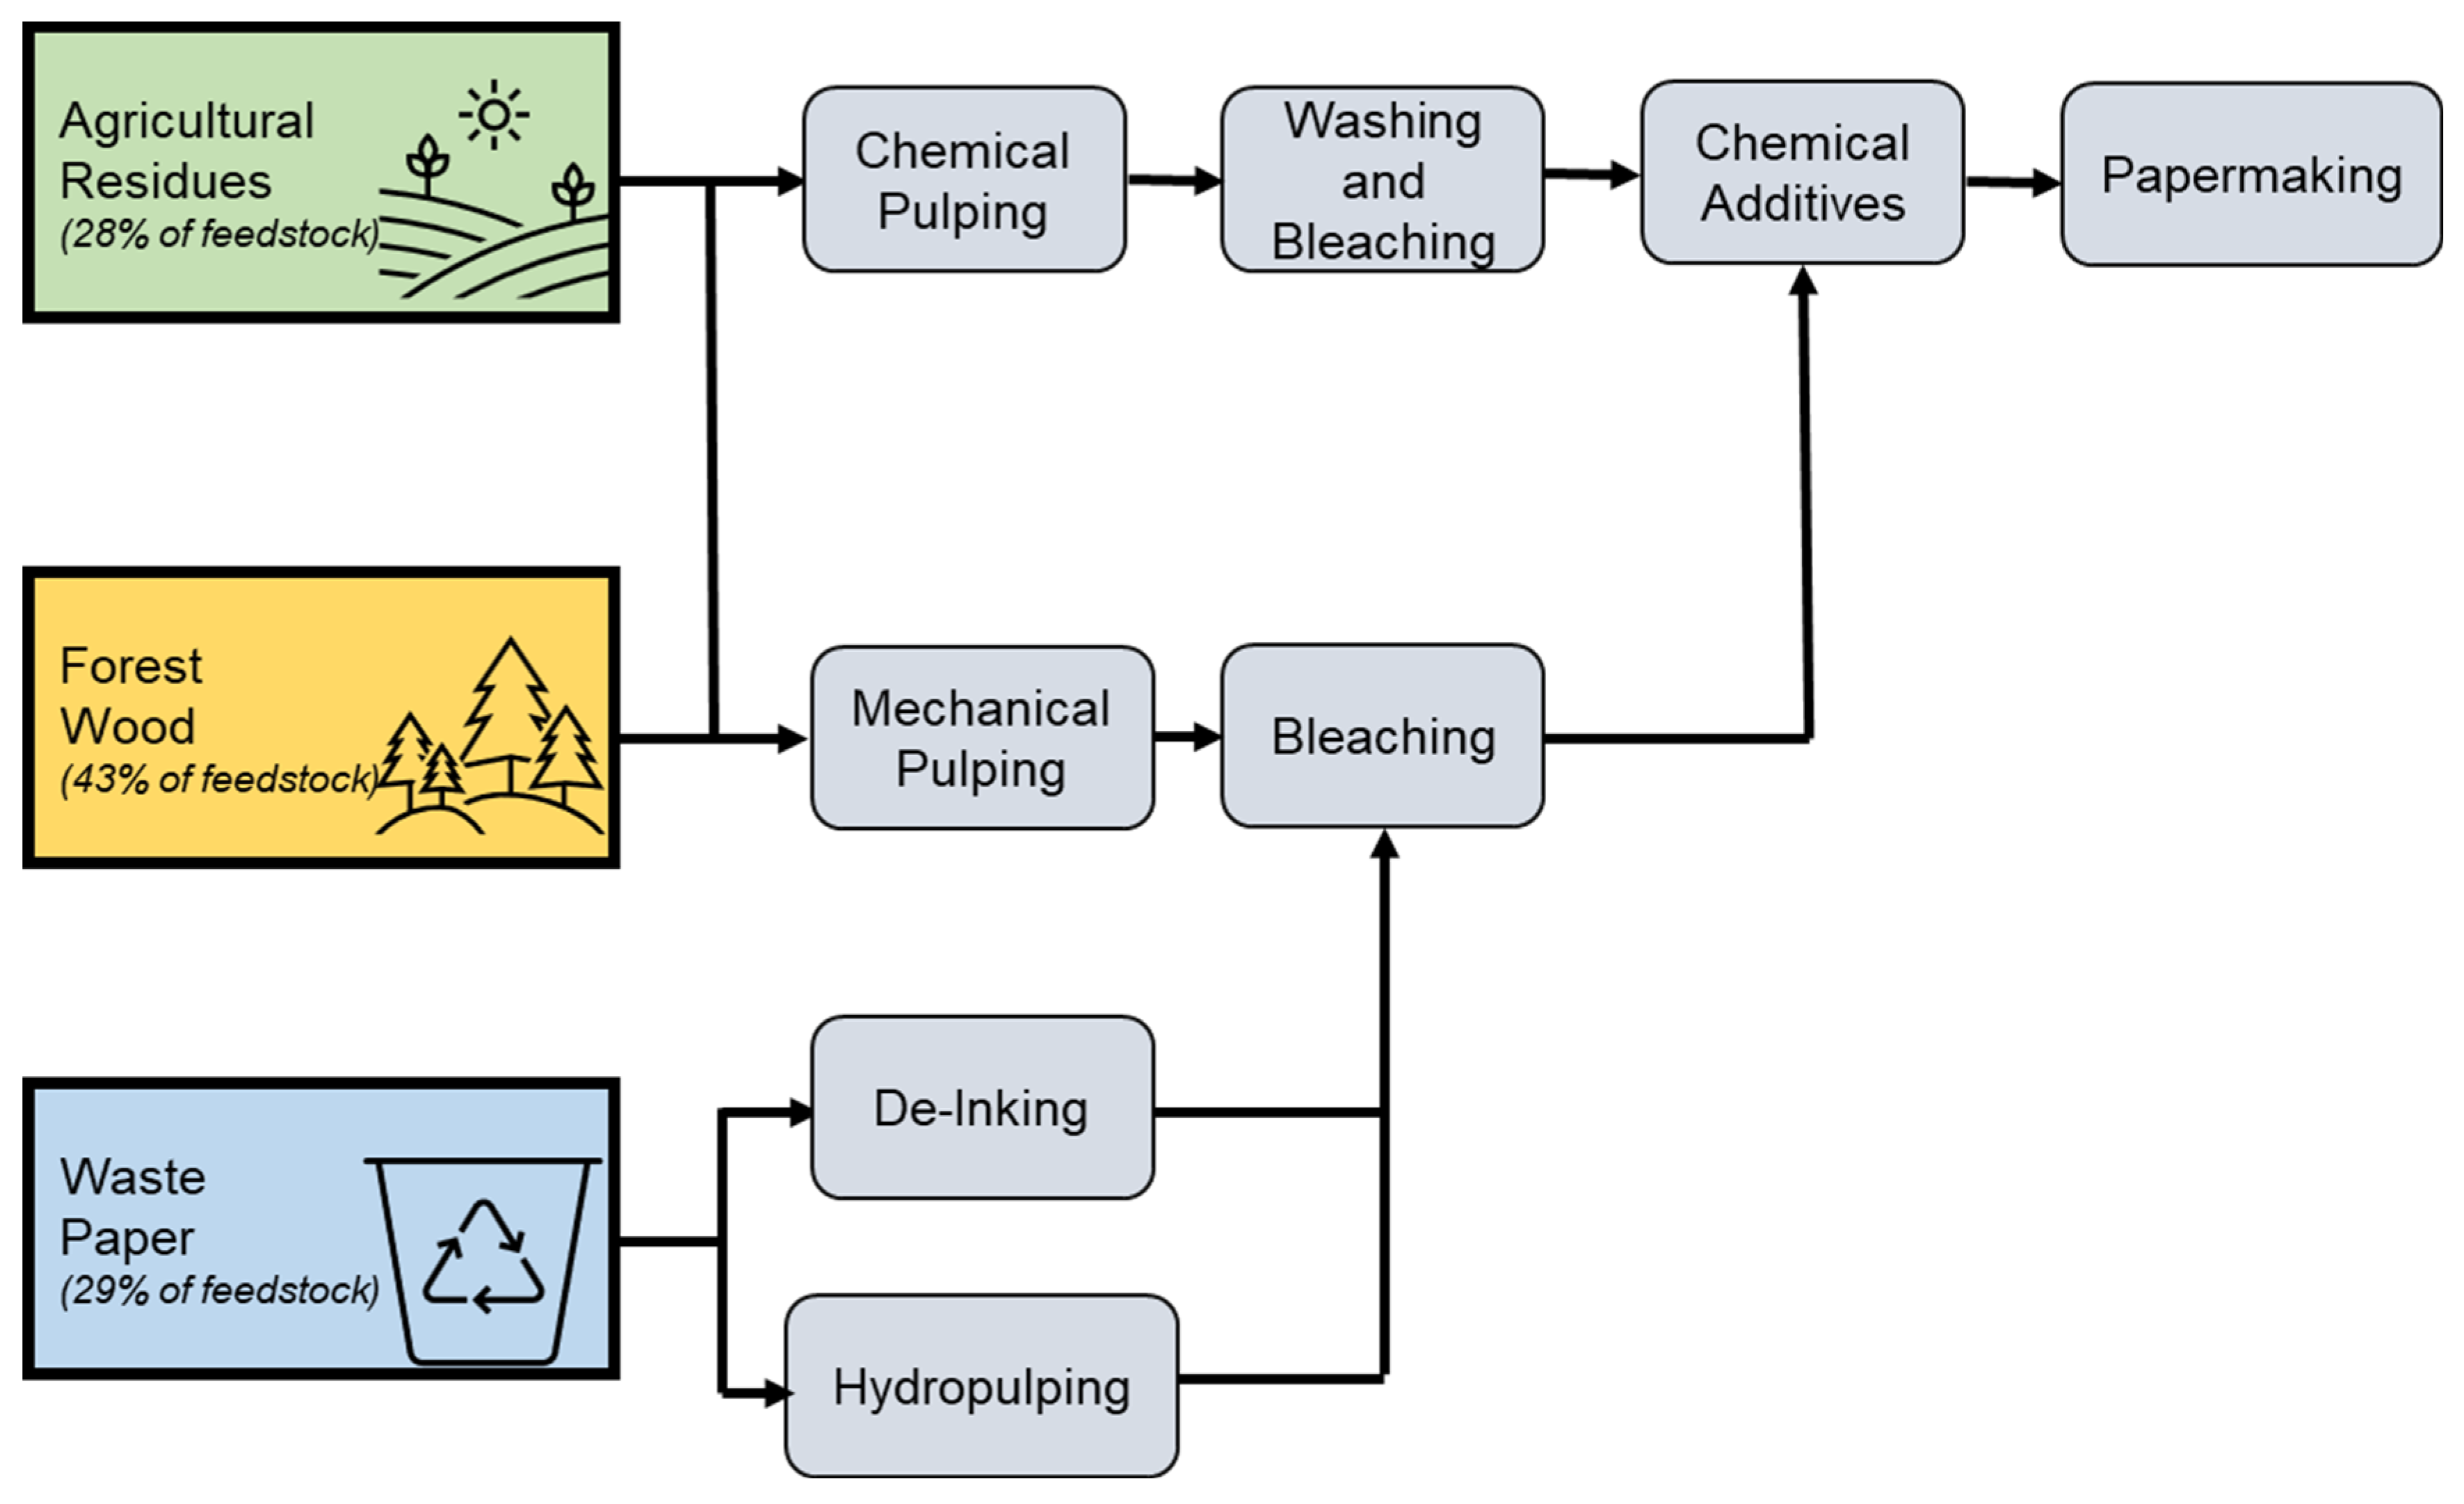 Papermaking Process - New Papers